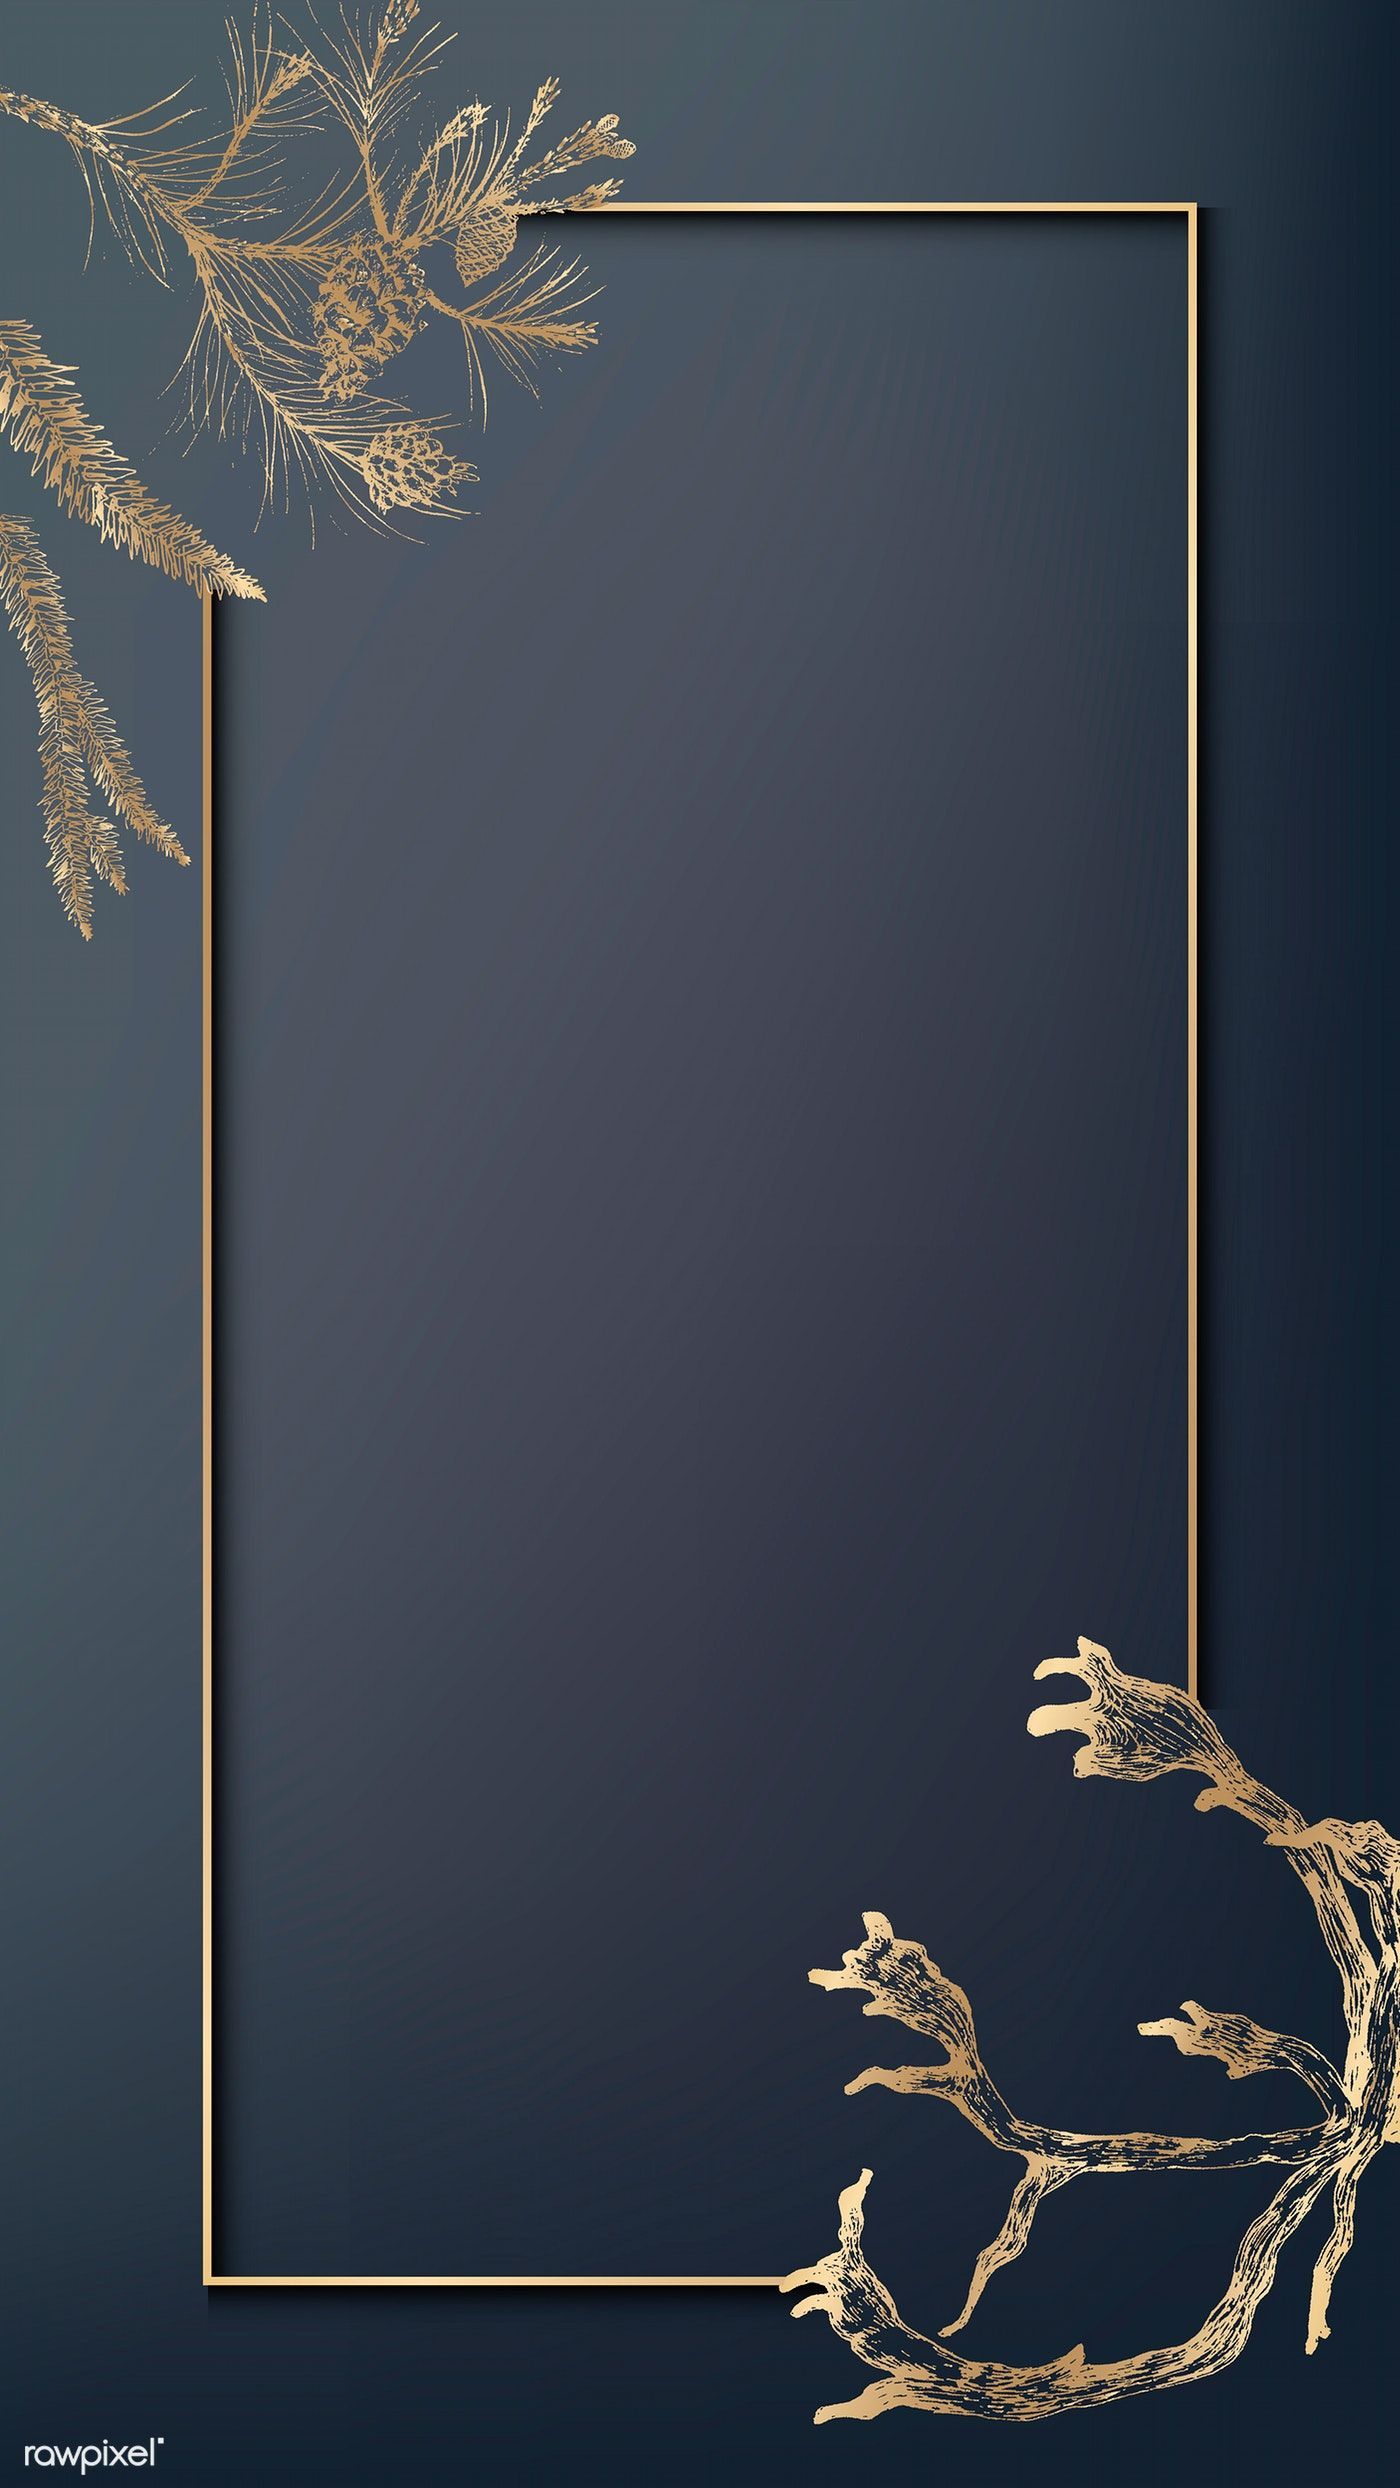 Download premium vector of Gold frame decorated with antlers mobile phone. Gold frame, Gold wallpaper background, Phone wallpaper